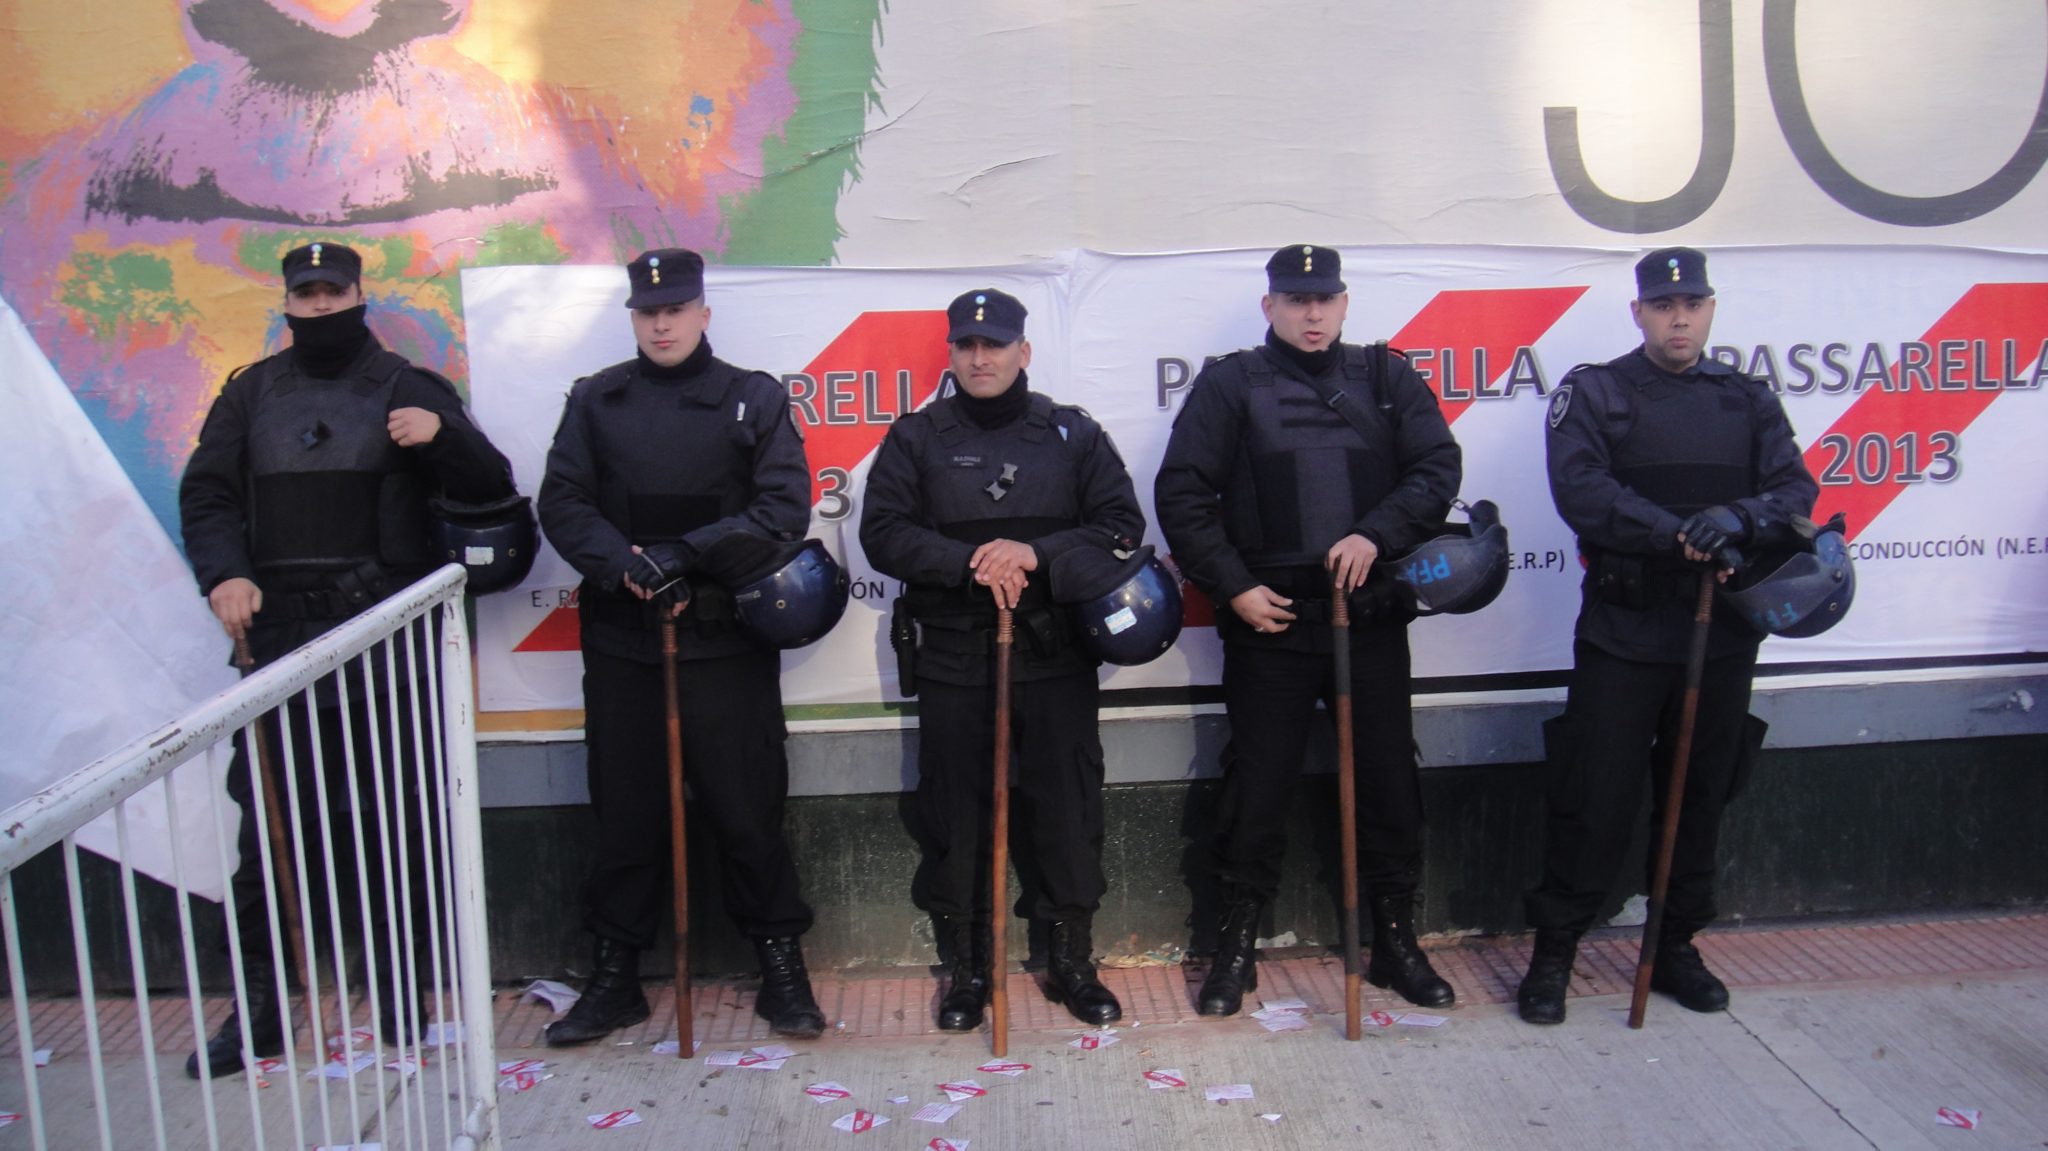 a group of police officers standing in front of a sign